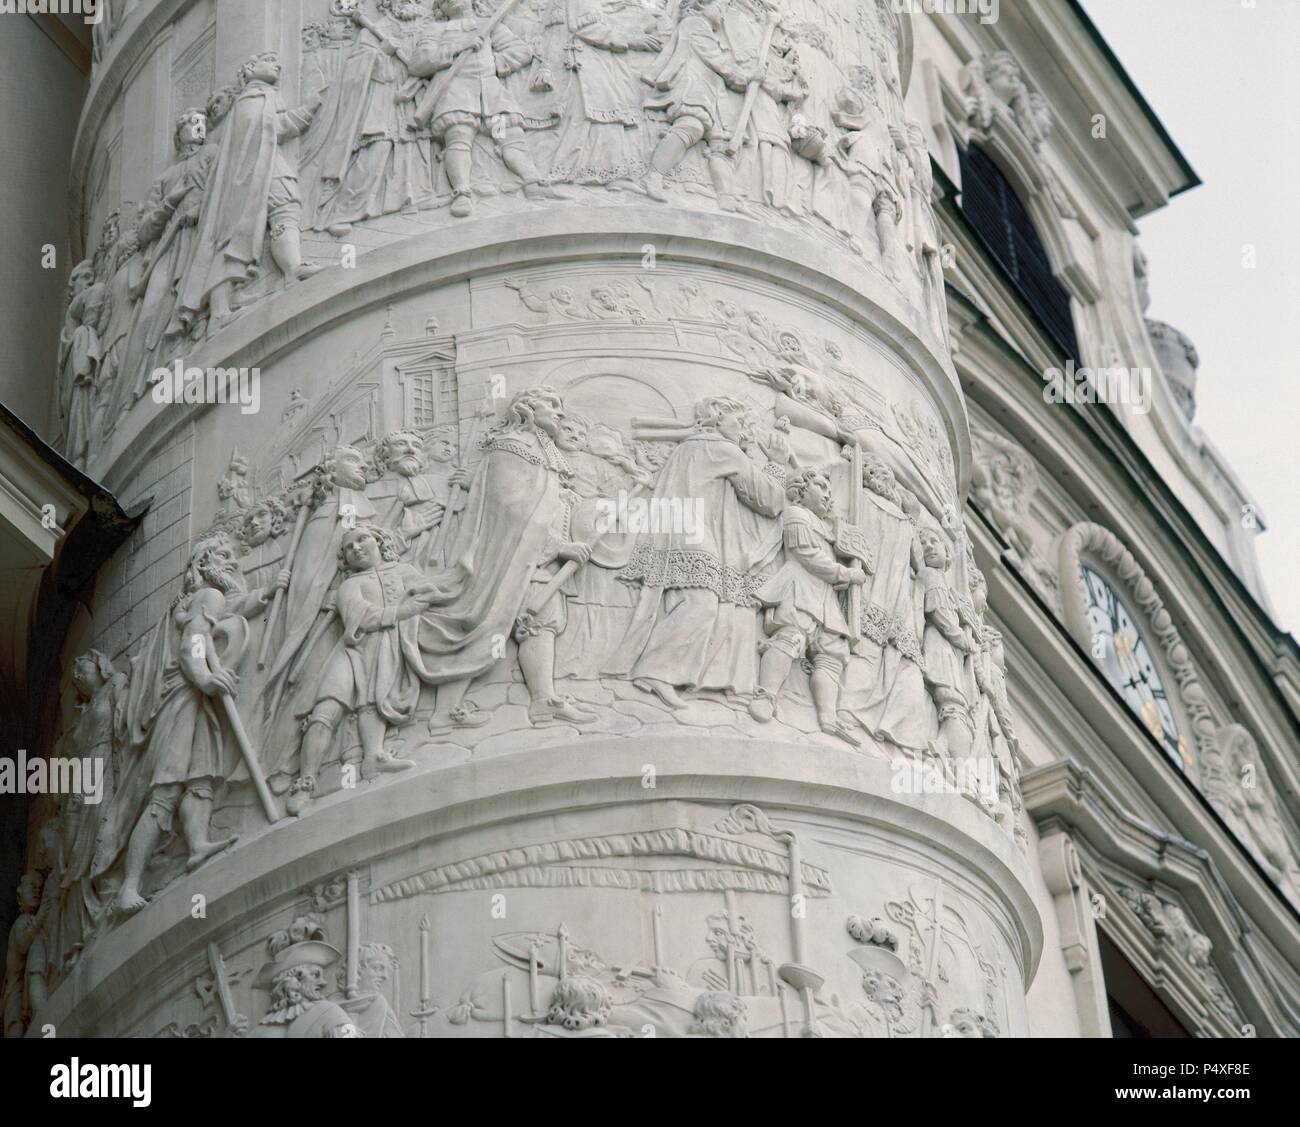 Baroque Art. Karlskirche or Church of St. Charles Borromeo (1716-1737). Column on the right side of the church, decorated with spirals and depicting scenes from the life of St. Charles Borromeo. Vienna. Austria. Stock Photo